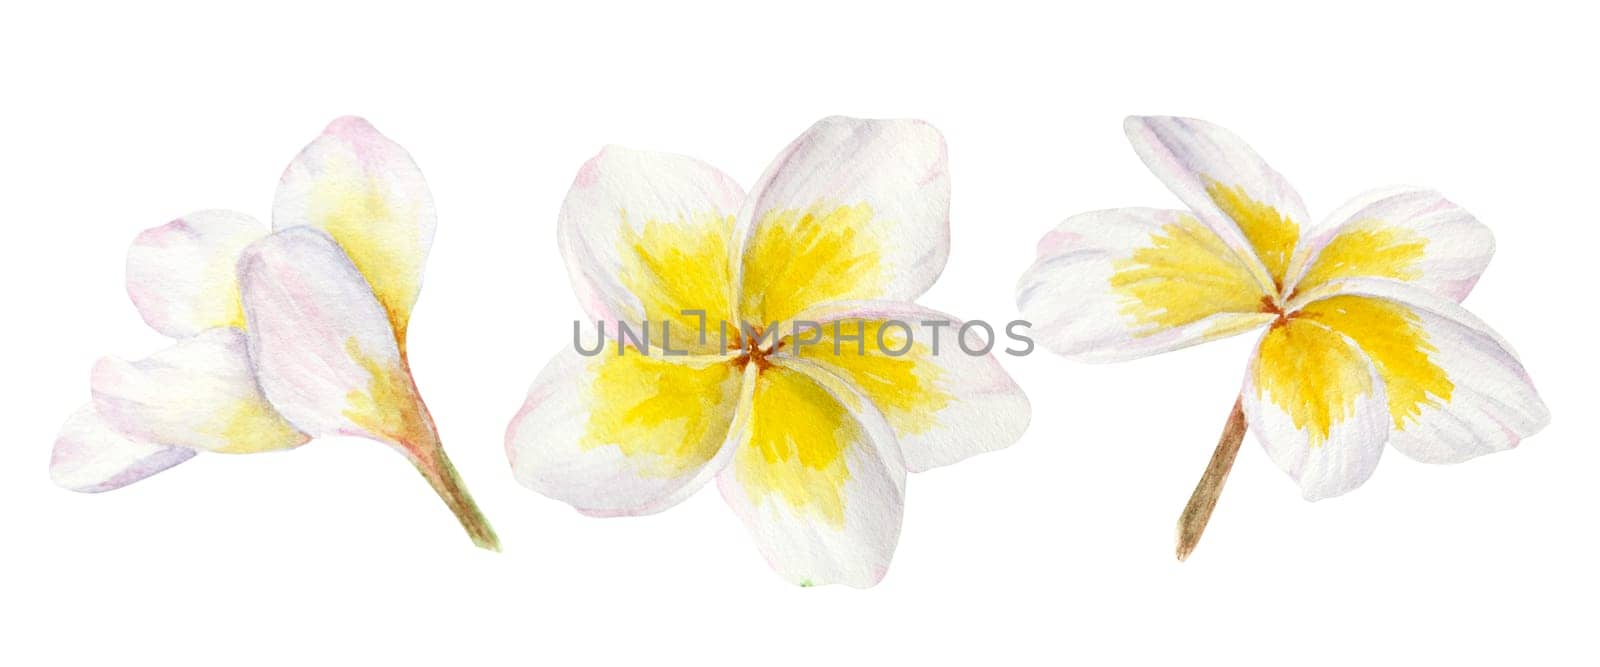 Set of white frangipani illustrations. Watercolor hand drawn clip art of exotic flower plumeria. Tropical painting for wedding invitations, spa and massage salon prints, cosmetic packing, travel guide by florainlove_art